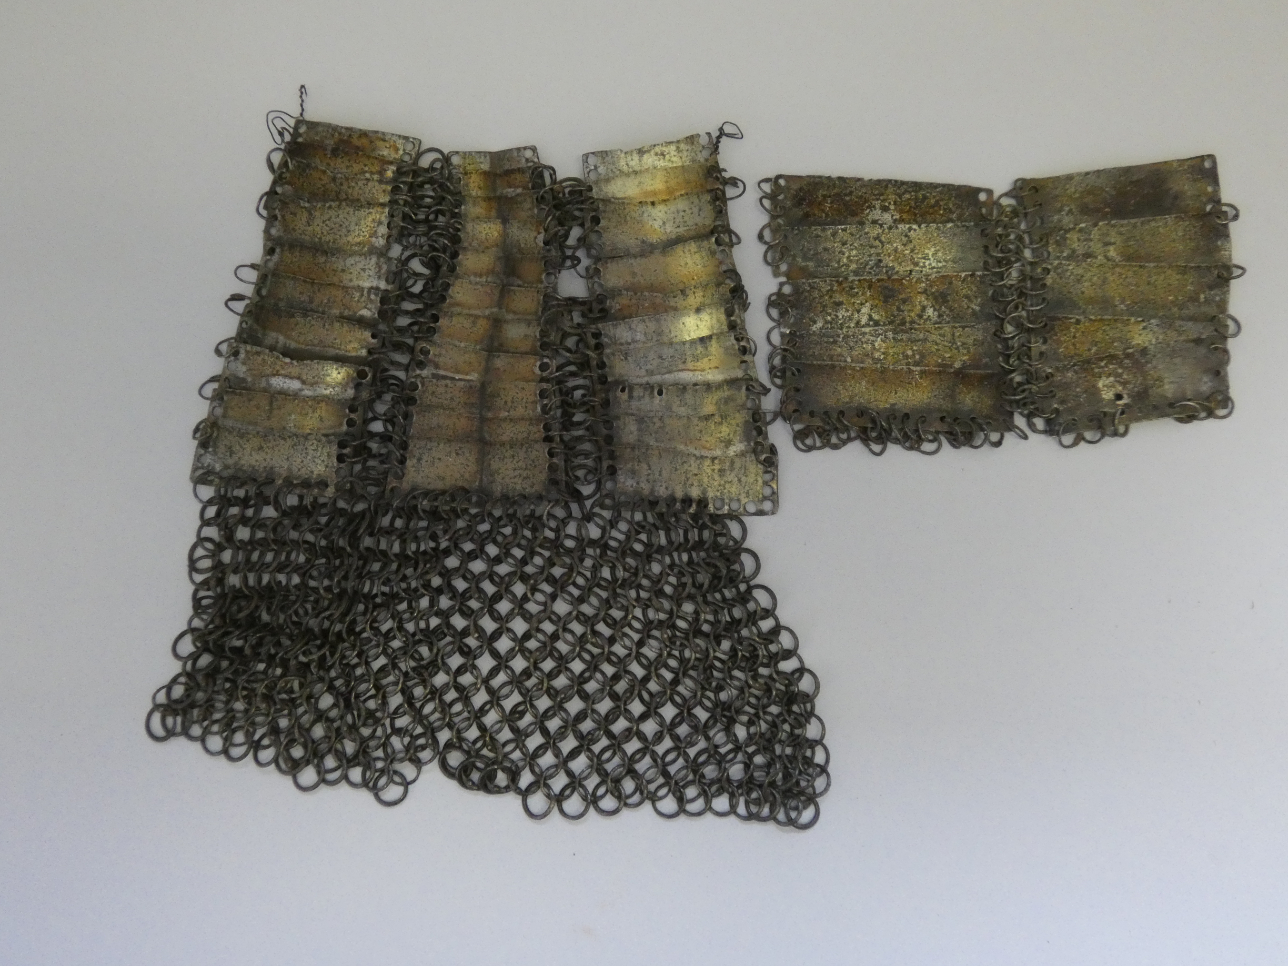 TWO PORTIONS OF OTTOMAN MAIL AND LAMELLAR ARMOUR, 15TH/EARLY 16TH CENTURY